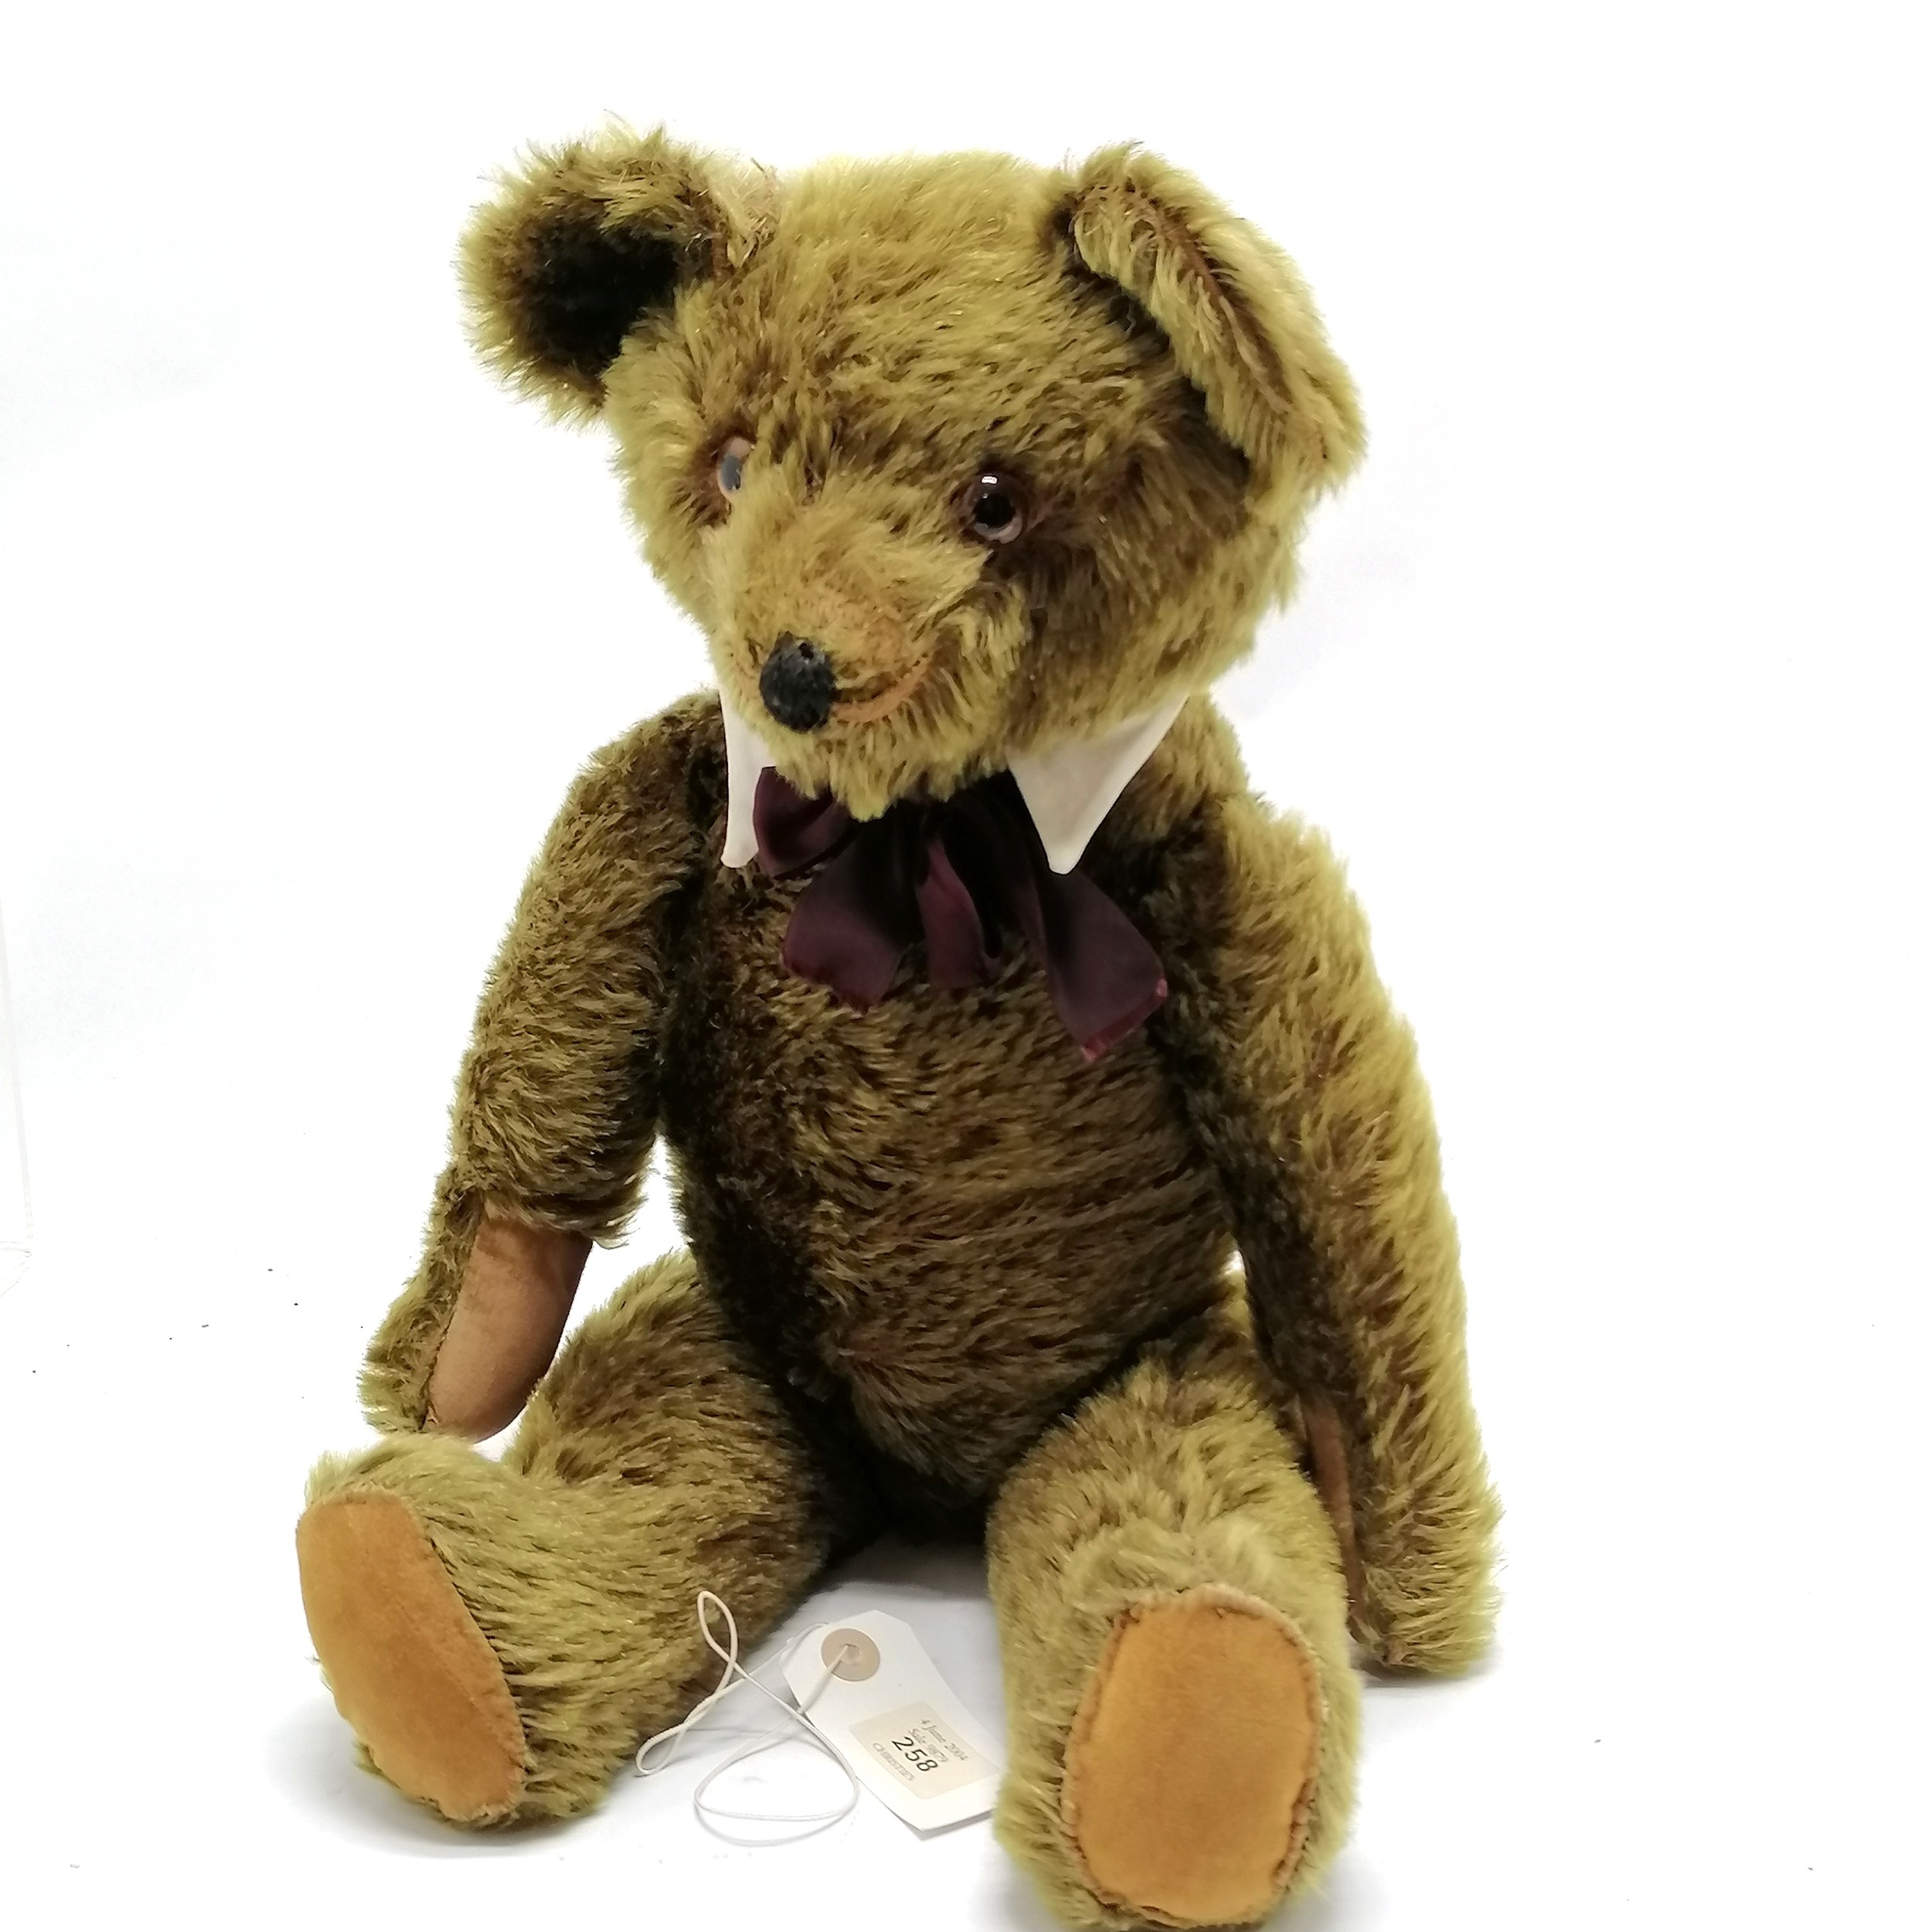 Vintage green mohair jointed Teddy bear 'Knickerbocker' c1940 with glass eyes and stitched nose - Image 9 of 9